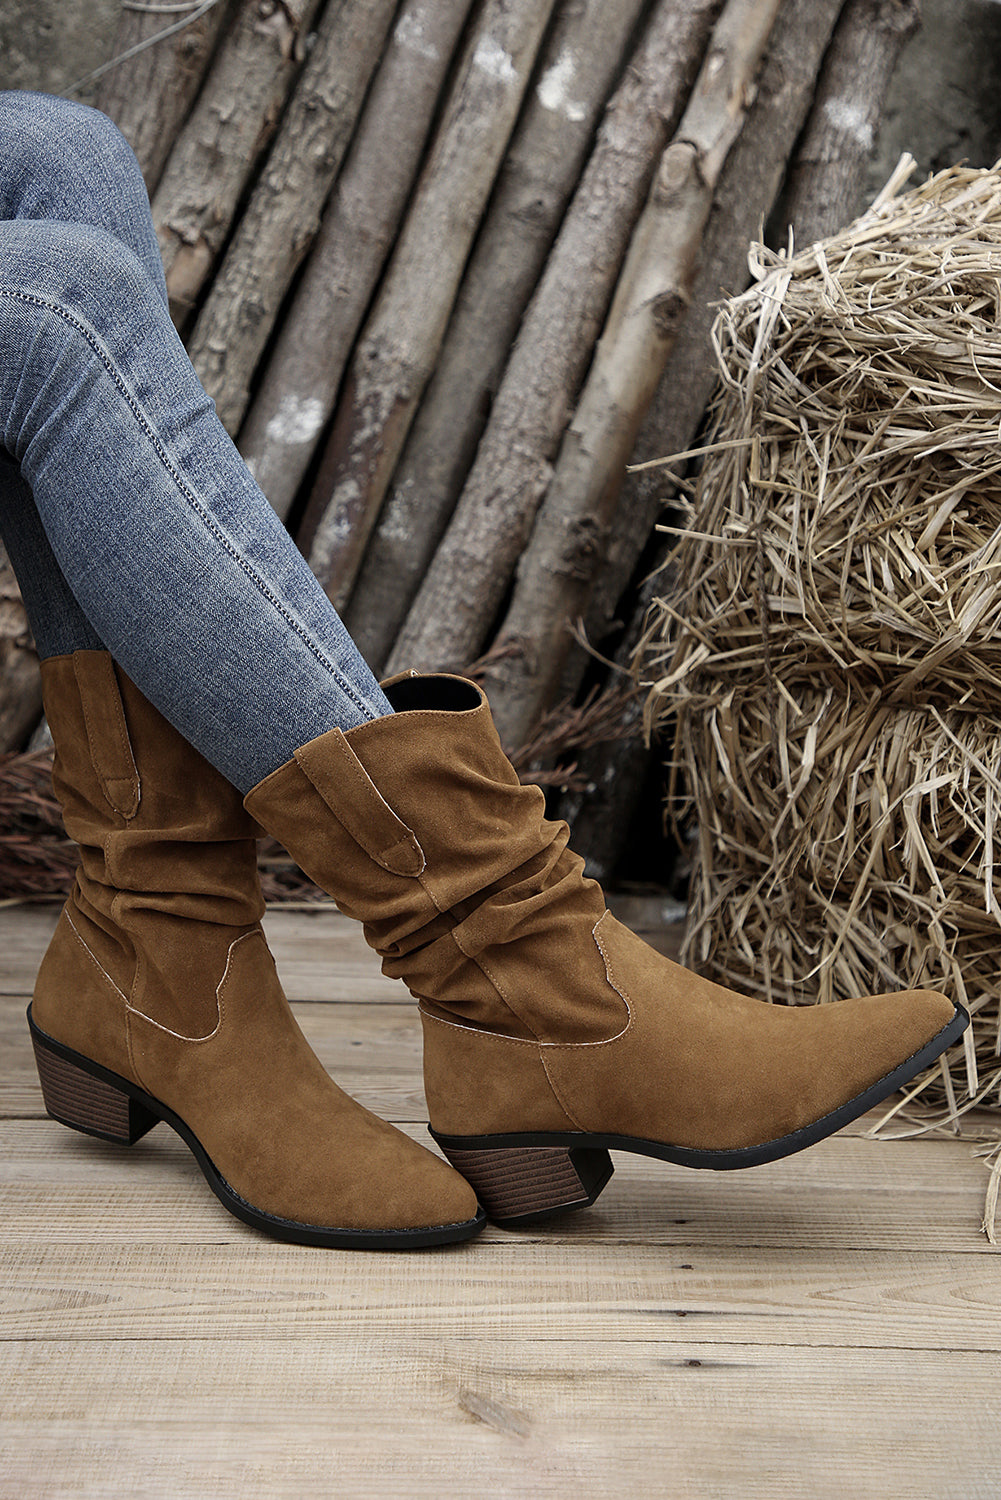 Chestnut Thick Heeled Scrunch Suede Pointed Toe Boots